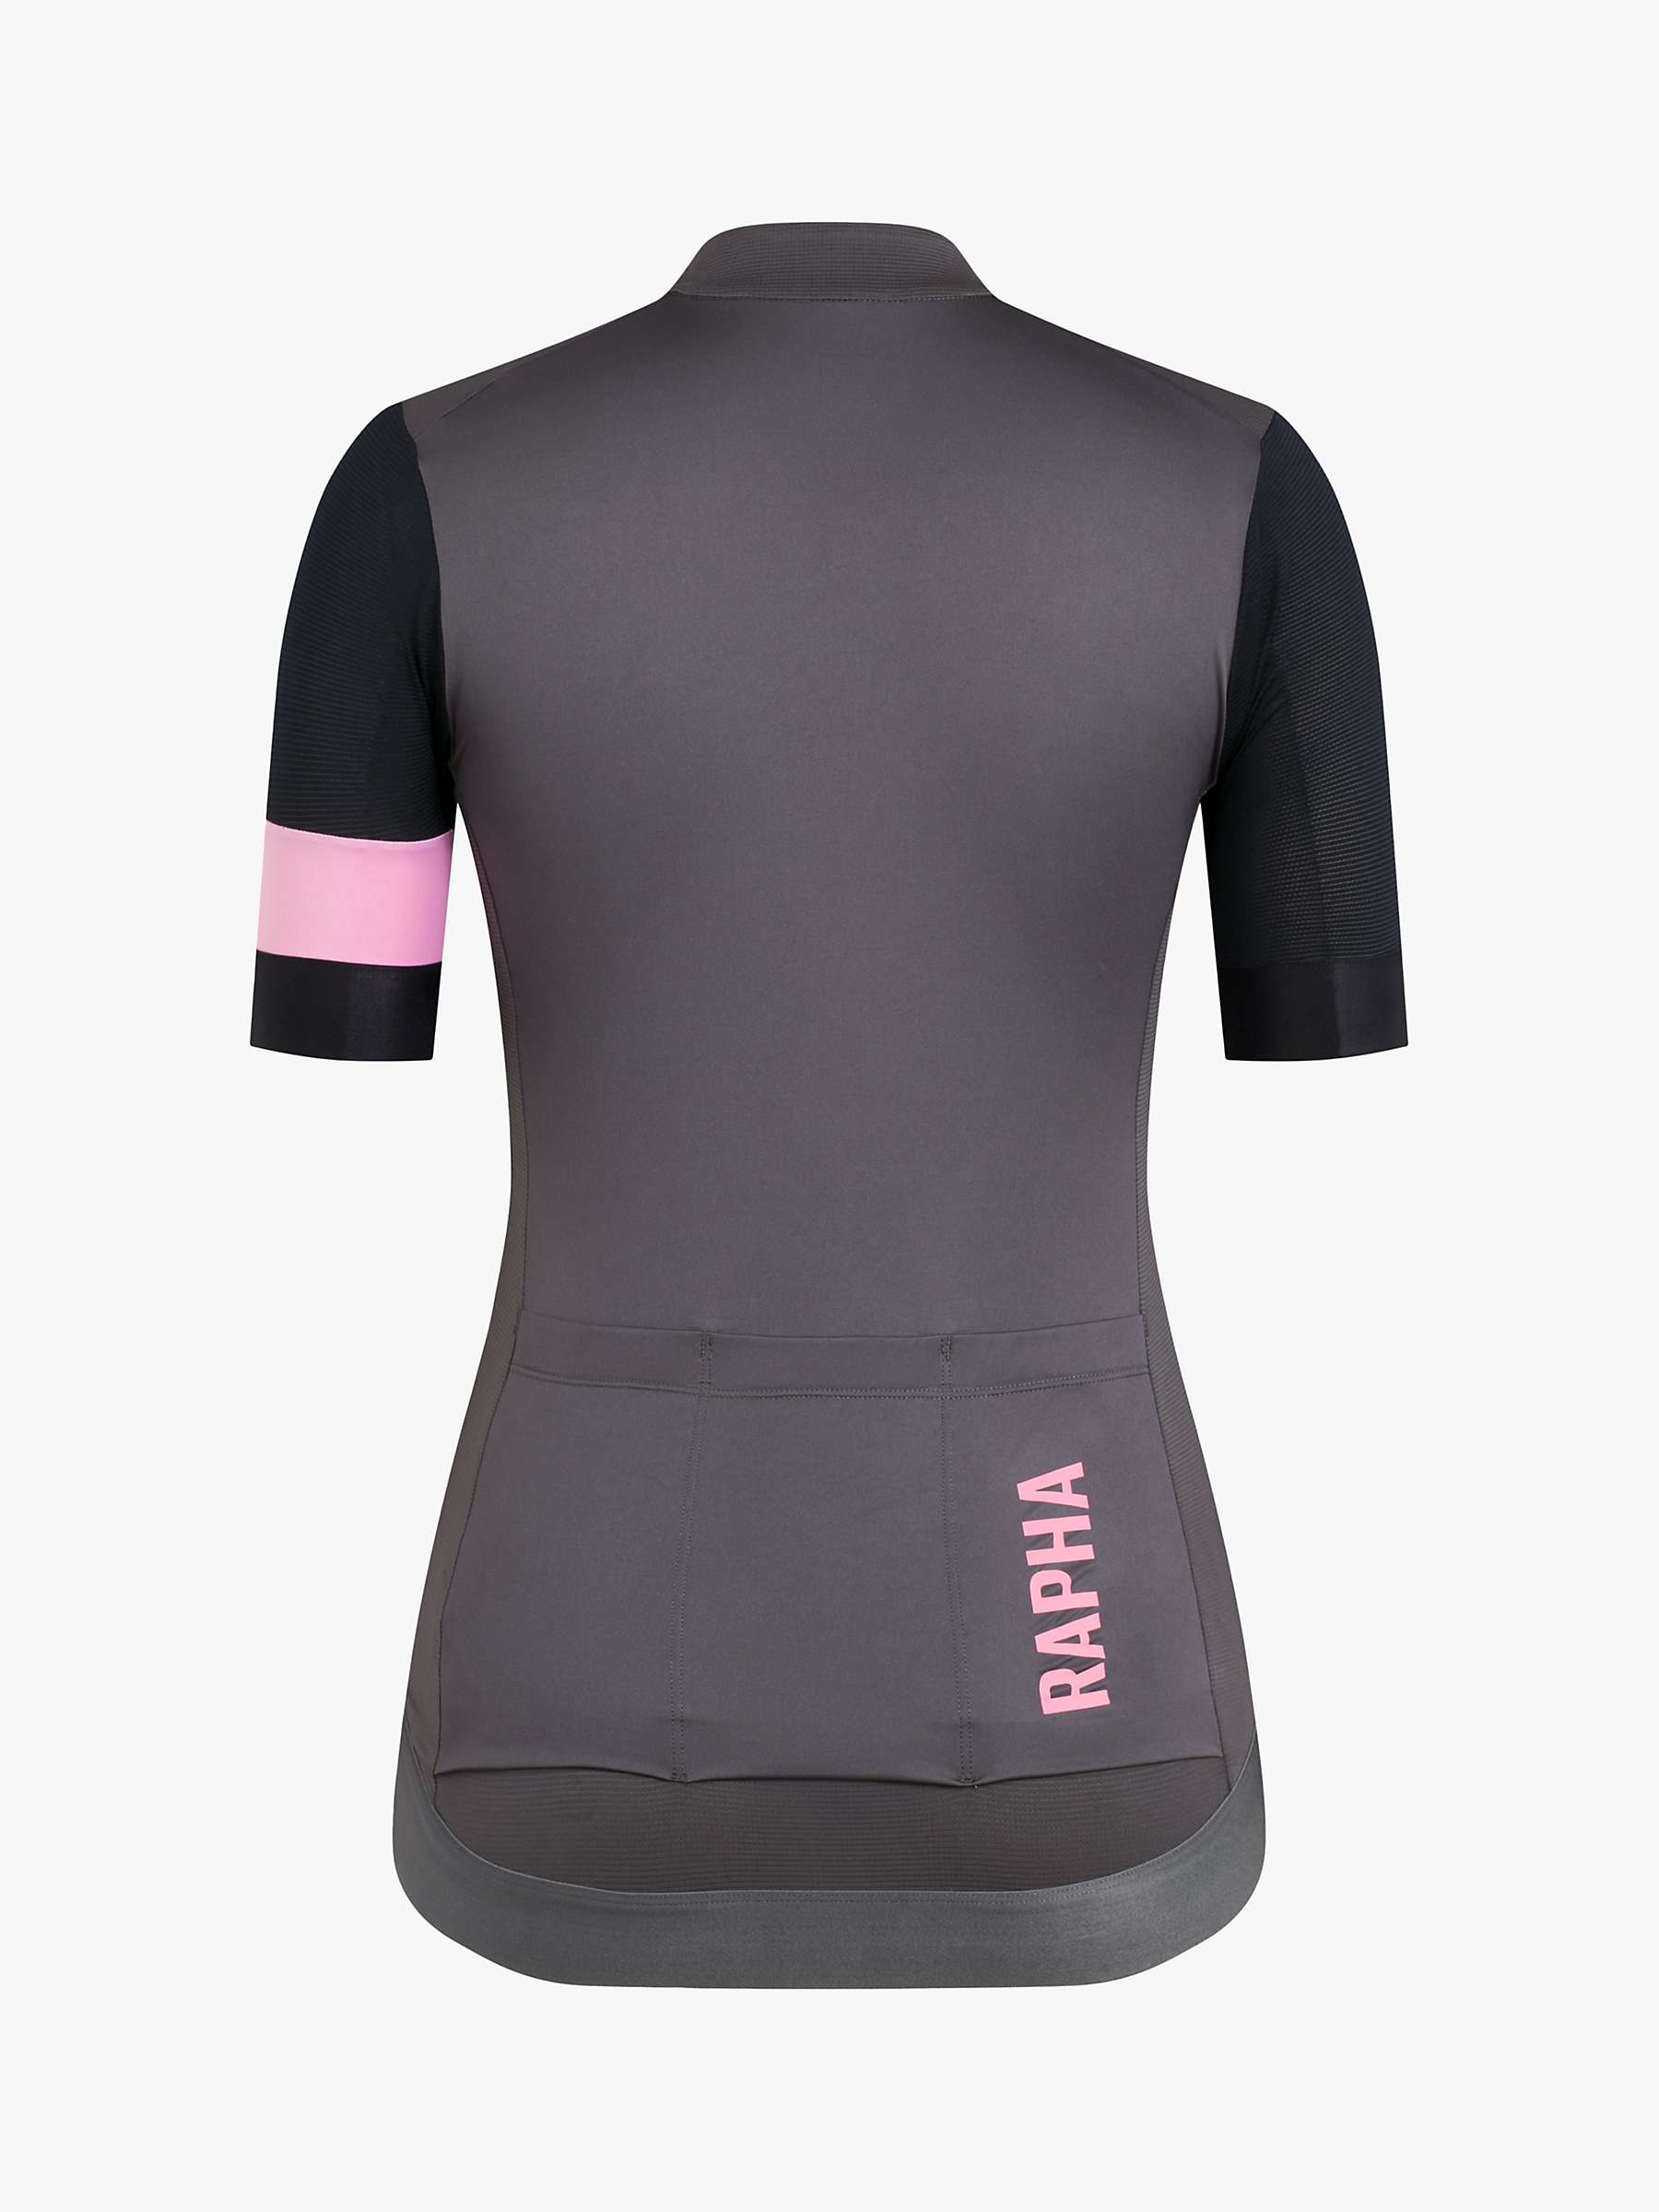 Buy Rapha Pro Team Training Jersey Short Sleeve Cycling Top Online at johnlewis.com